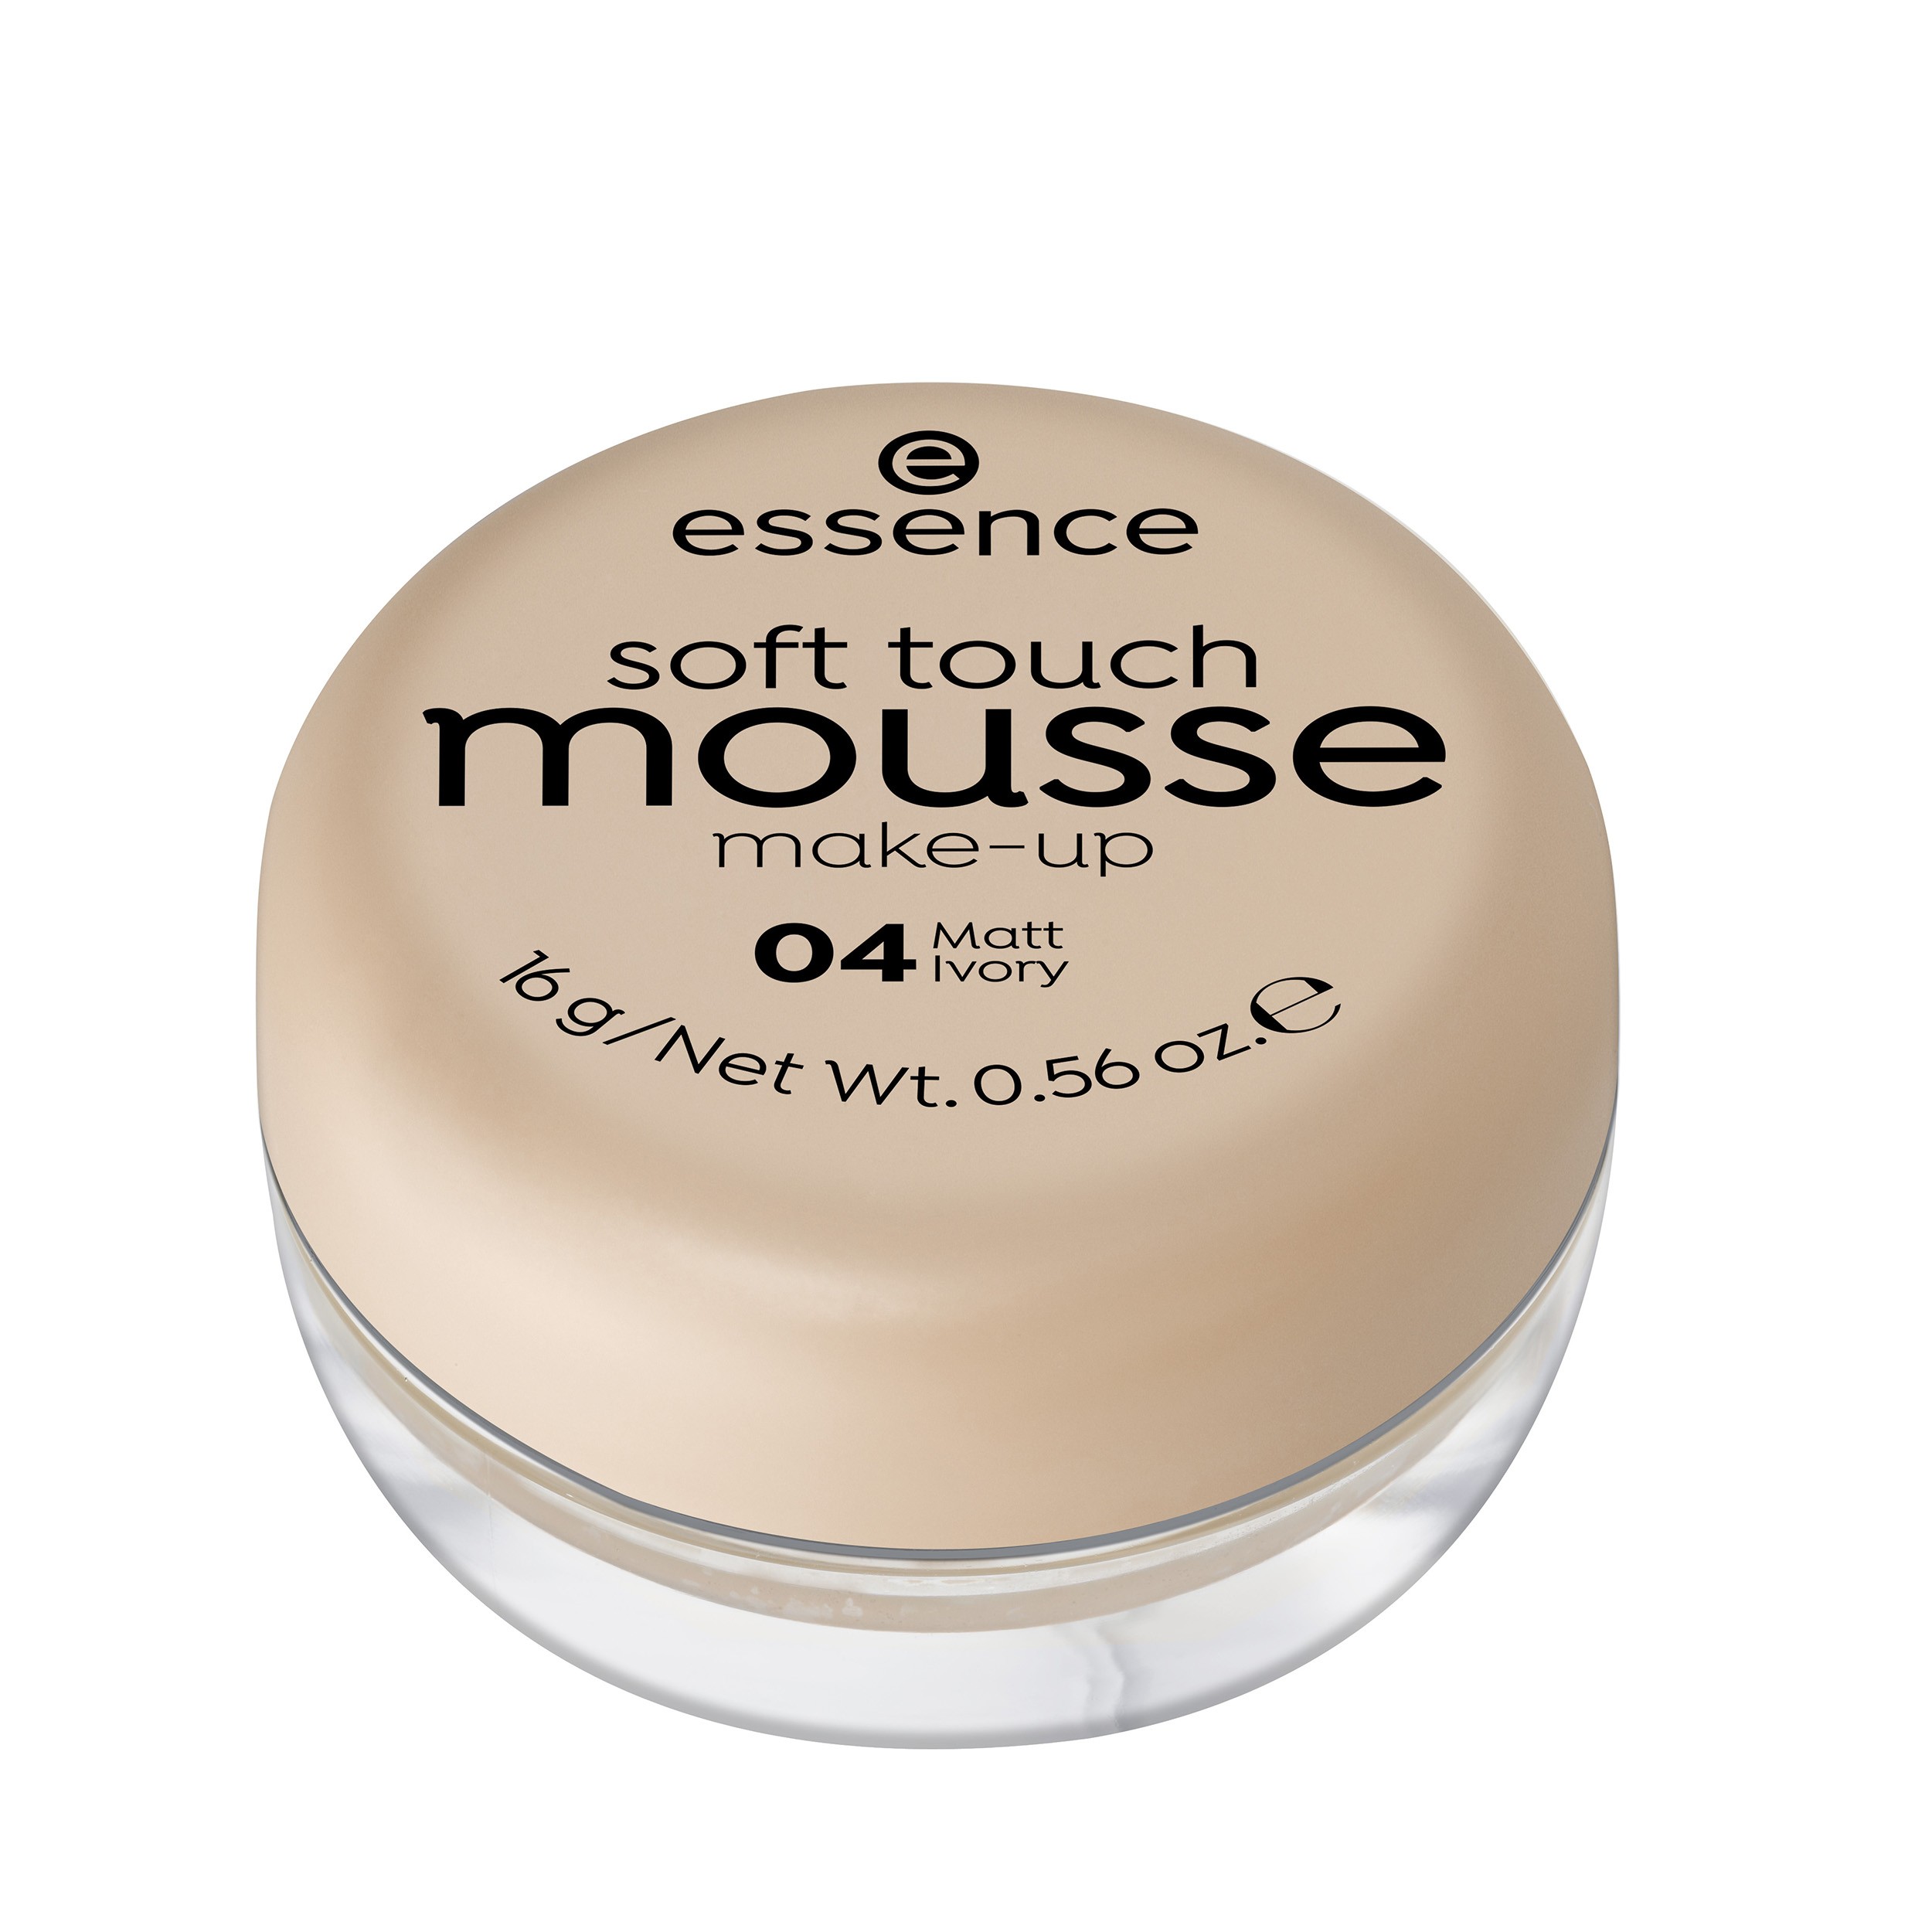 Foundation - Soft Touch Mousse Make-Up